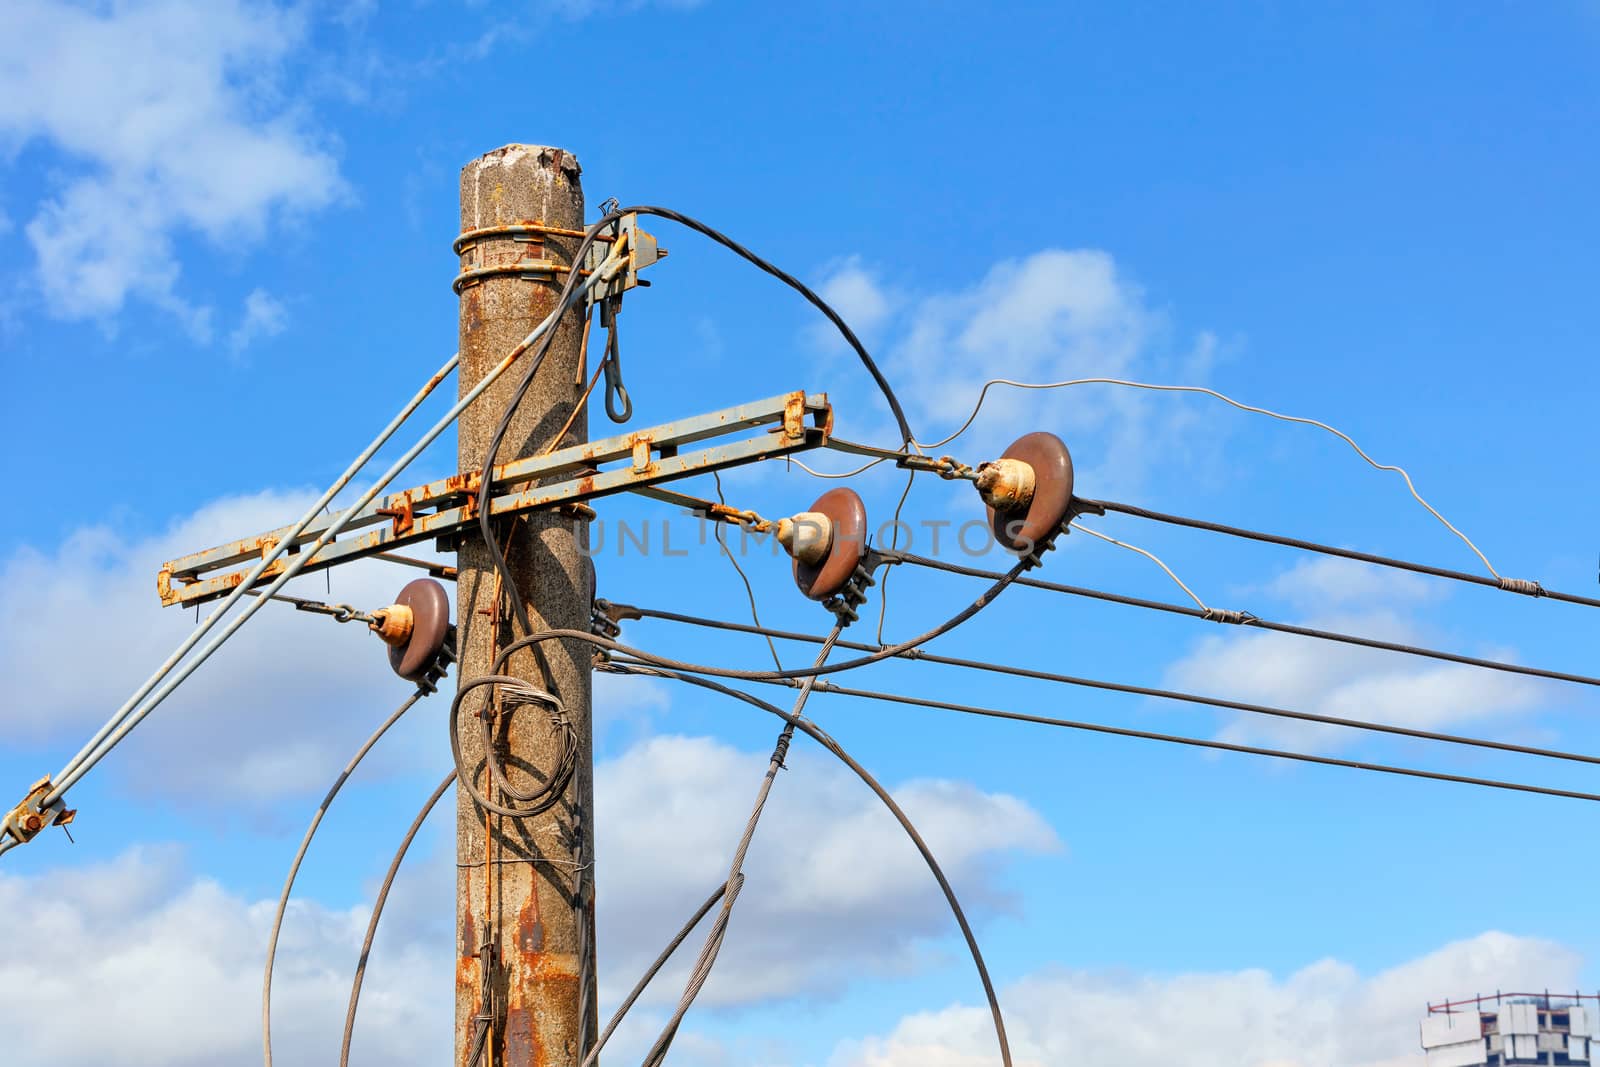 The top of an old concrete pillar with electric wires and a connected three-phase current stands against a blue cloudy sky.